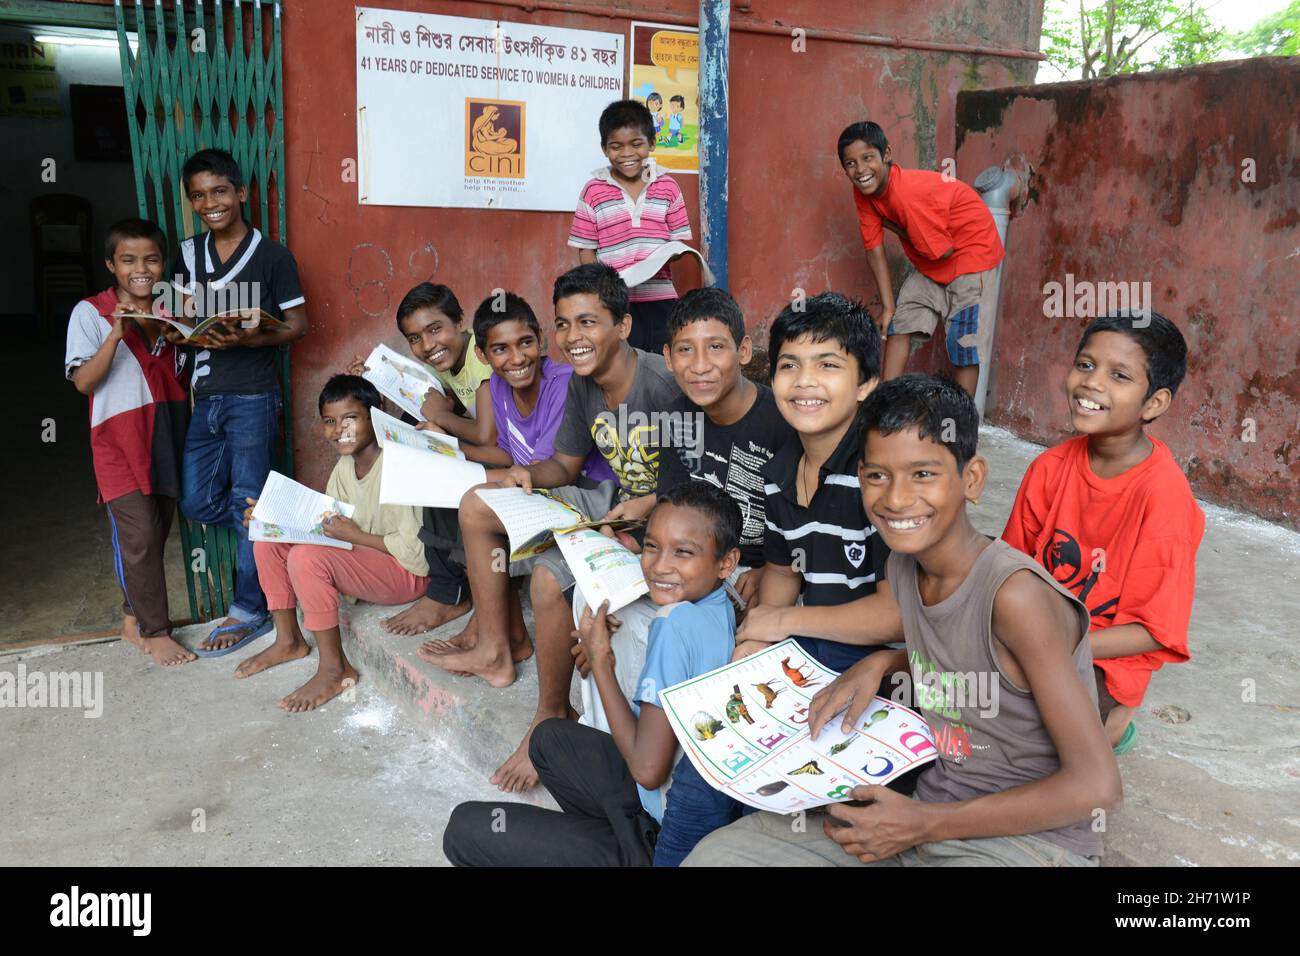 Classroom education, counselling support and first aid techniques provided to street kids. Kolkata, India. Stock Photo